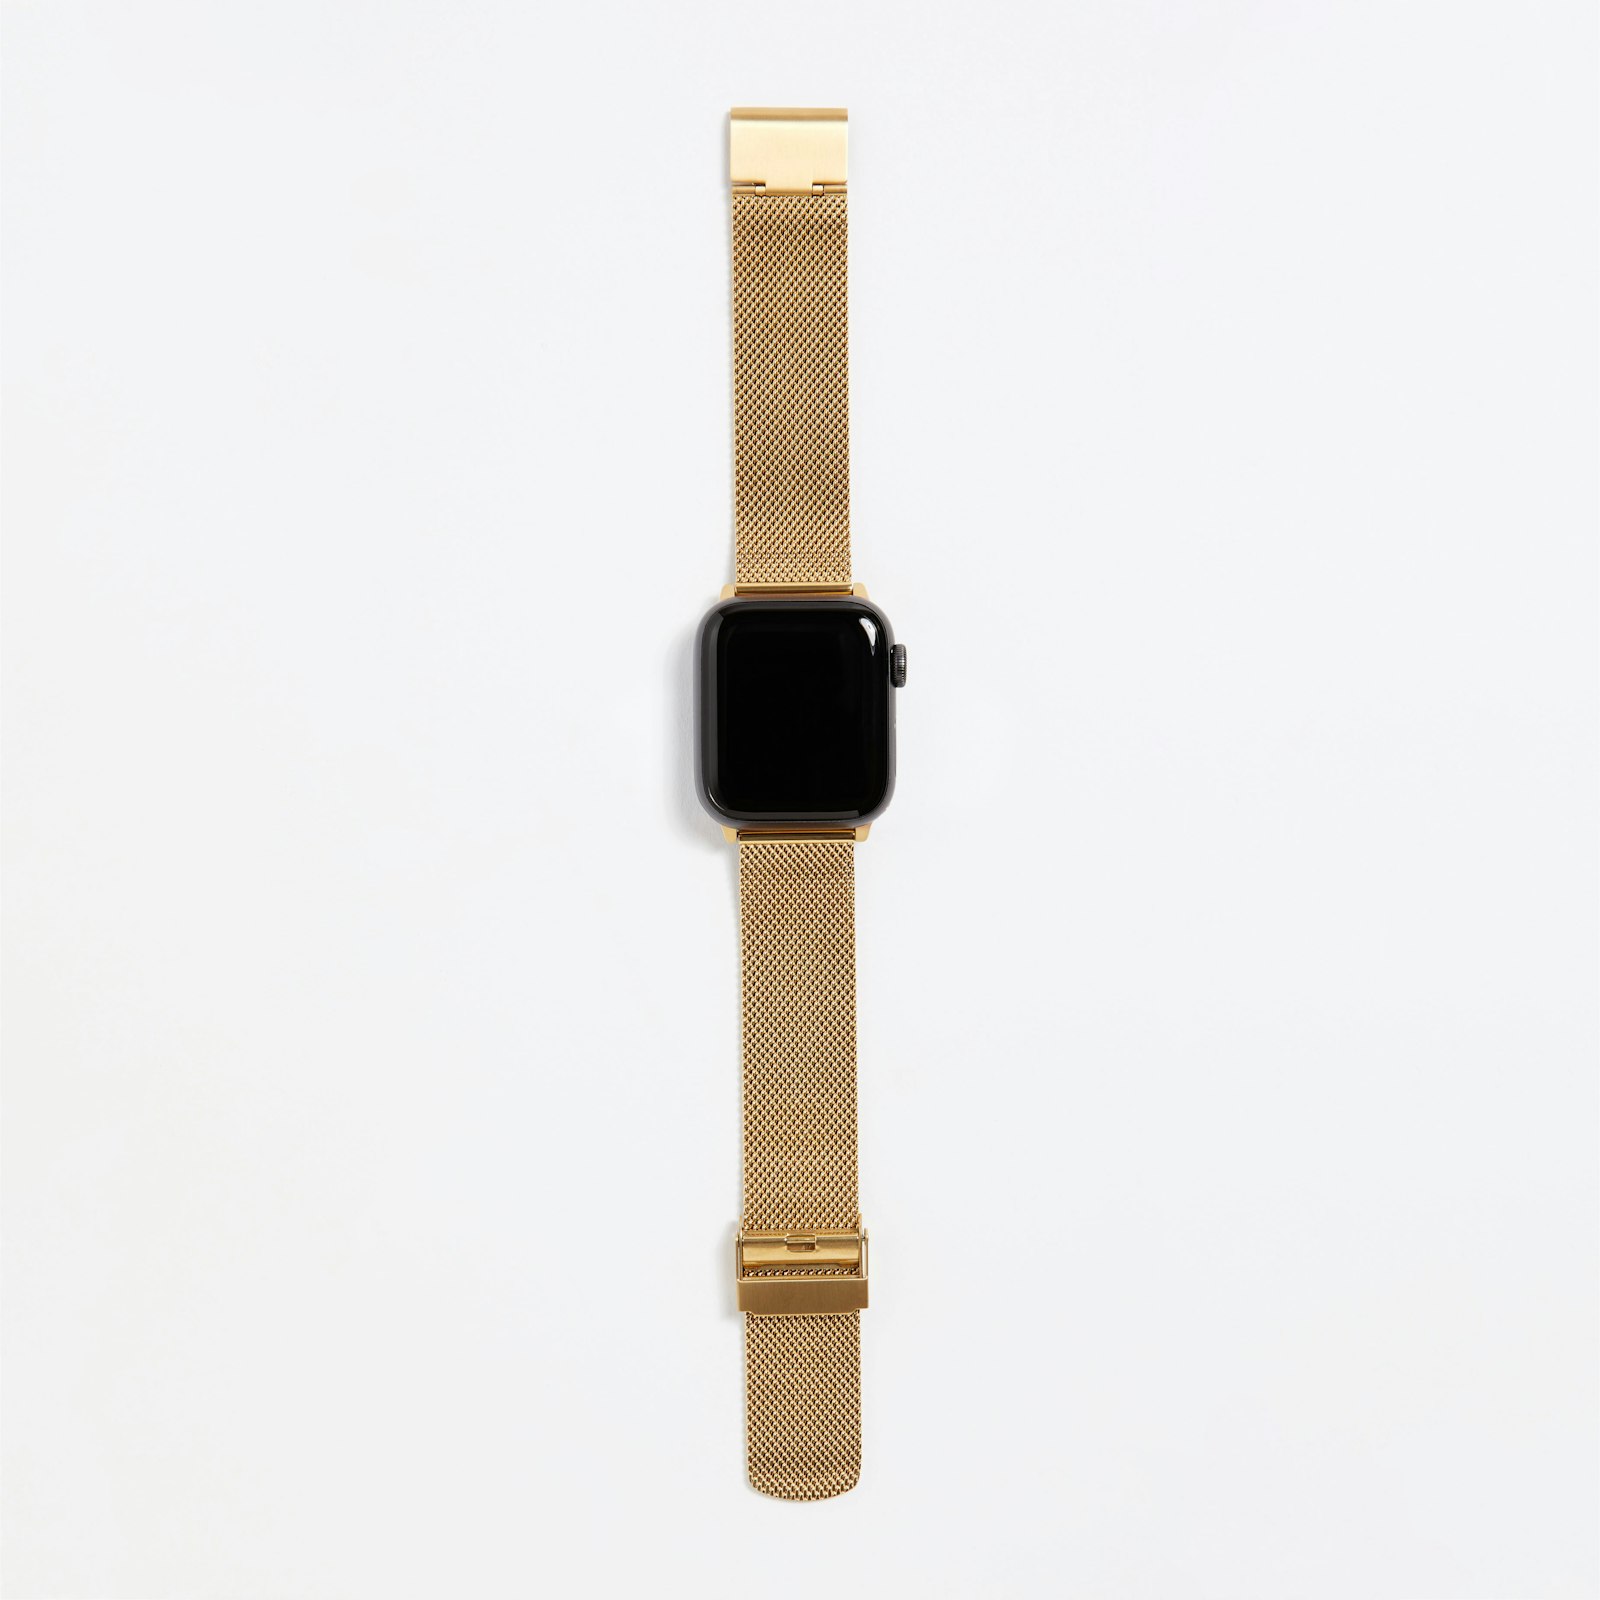 Apple_WatchBand_StainlessSteel_Mesh_Gold_Large_1x1_FRONTWITHWATCH_0241.jpg